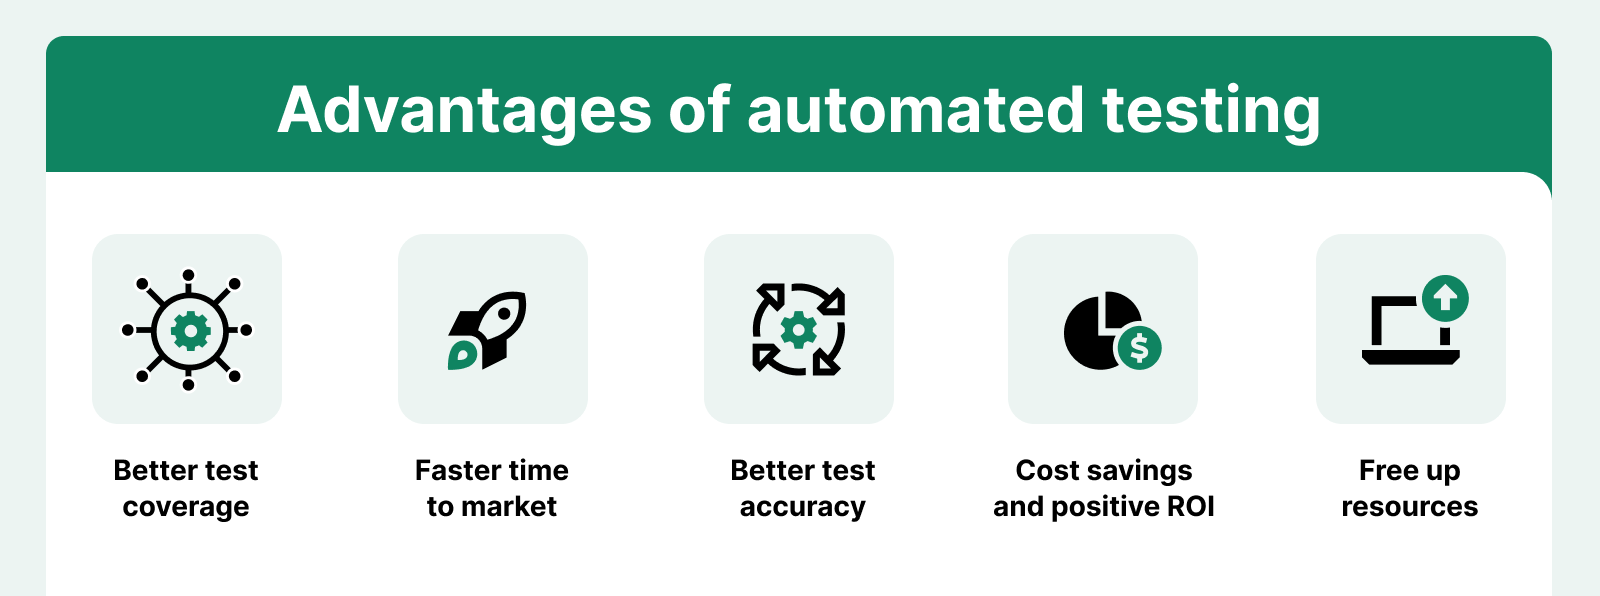 Advantages of Automated Testing